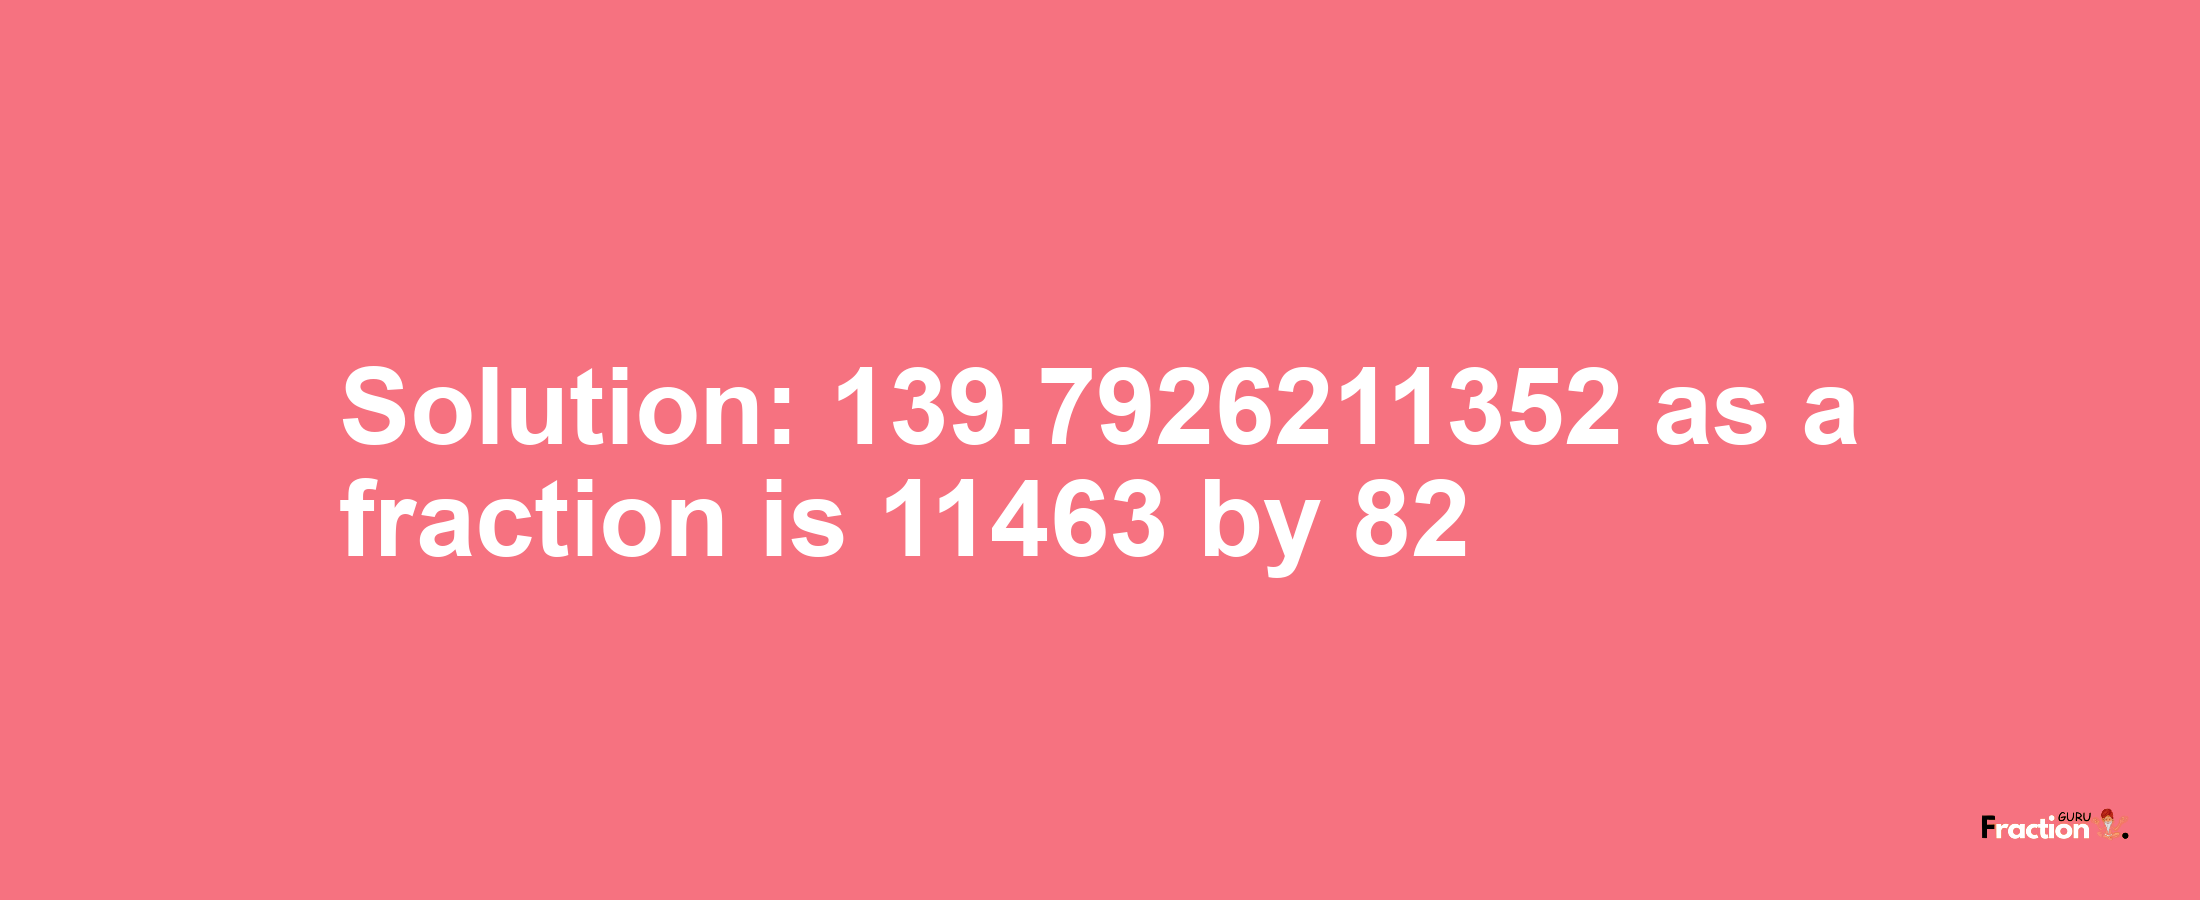 Solution:139.7926211352 as a fraction is 11463/82